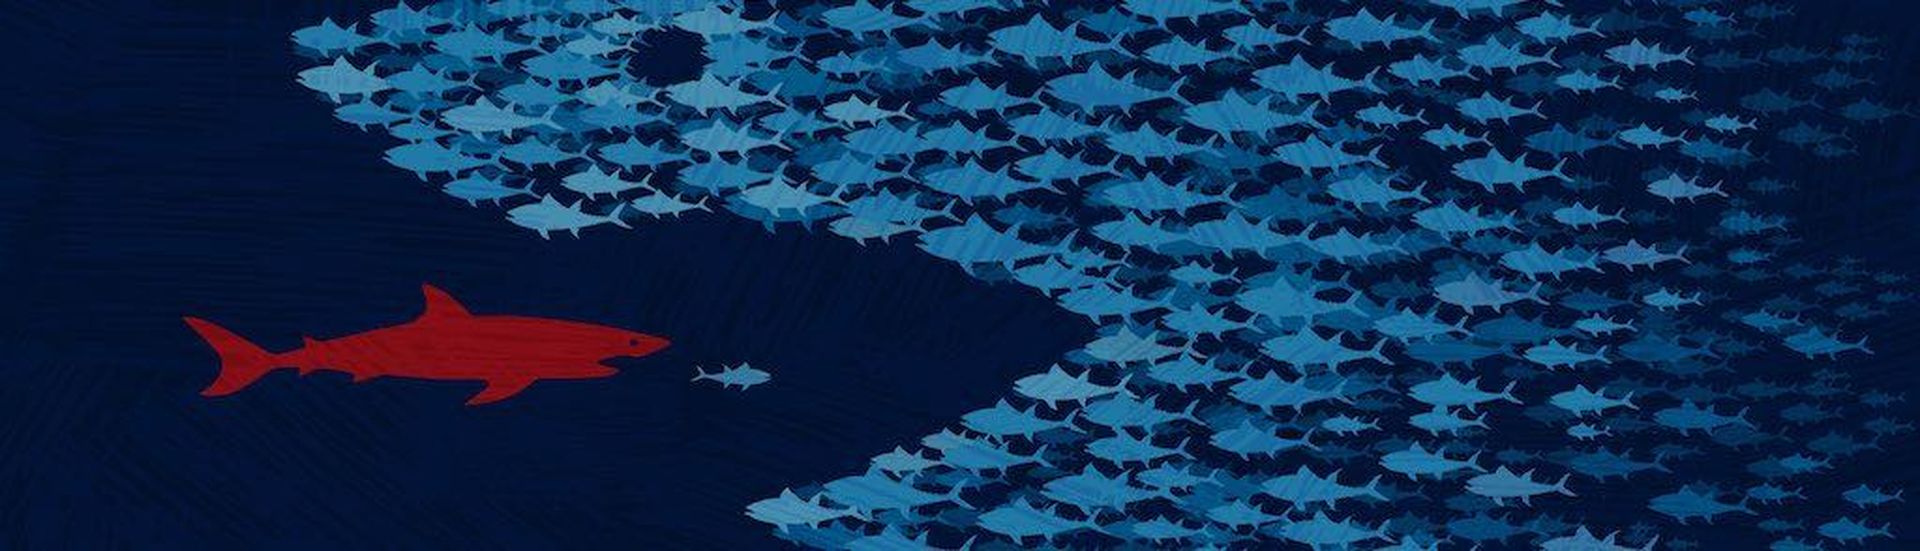 School of little blue fishes come together and join forces to overcome and eat red shark. Survival through working together to save democracy. United we stand, divided we fall. Fighting against racism, voter suppression and corruption. Teamwork concep